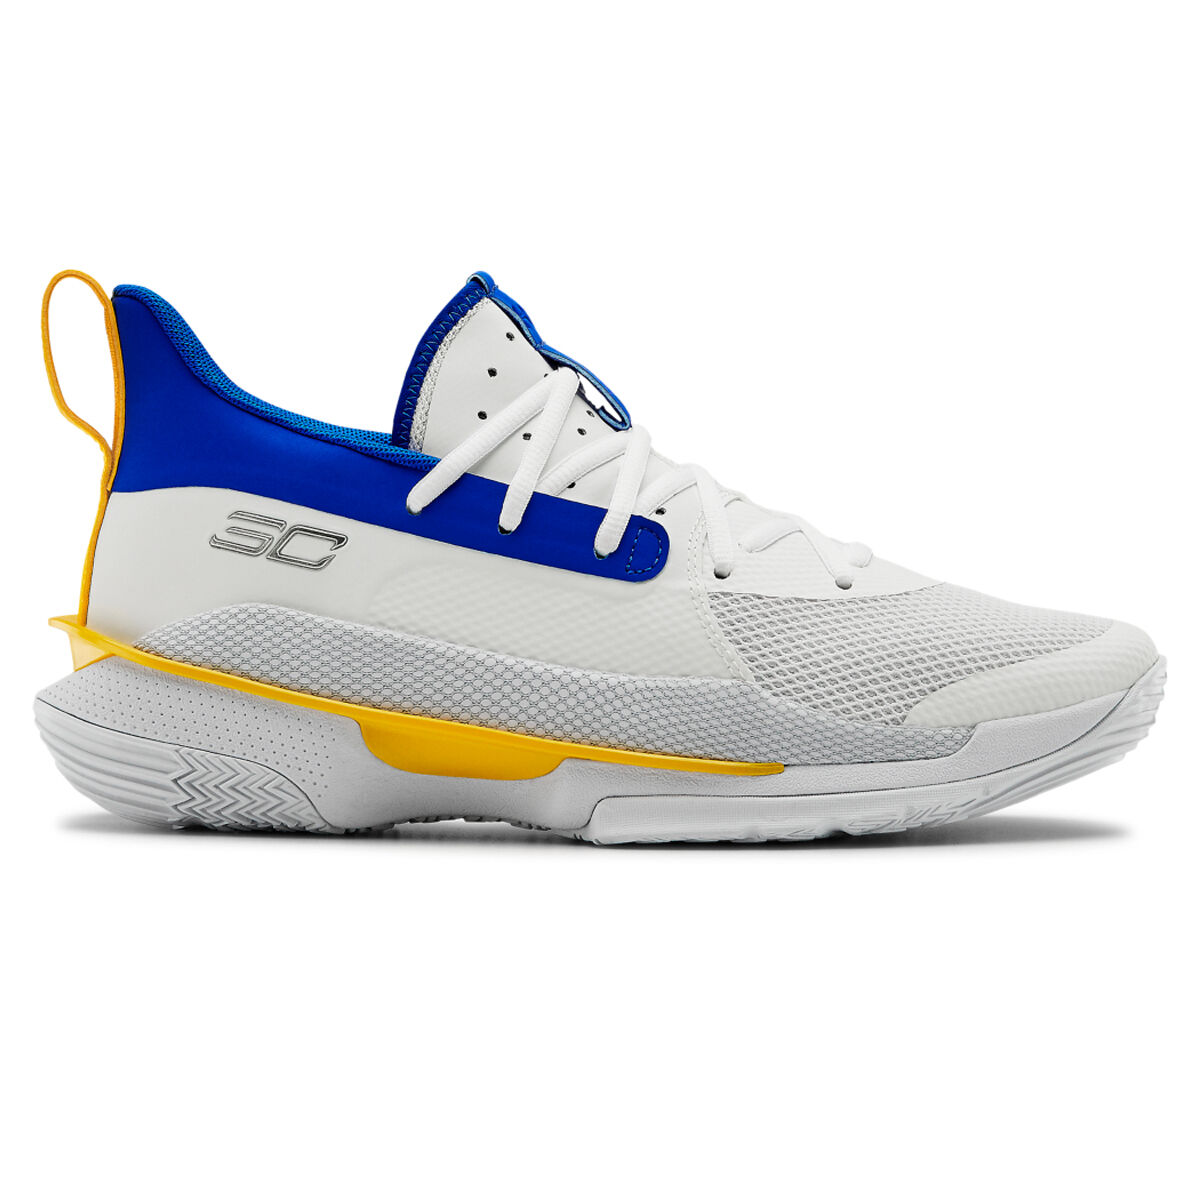 curry men's basketball shoes